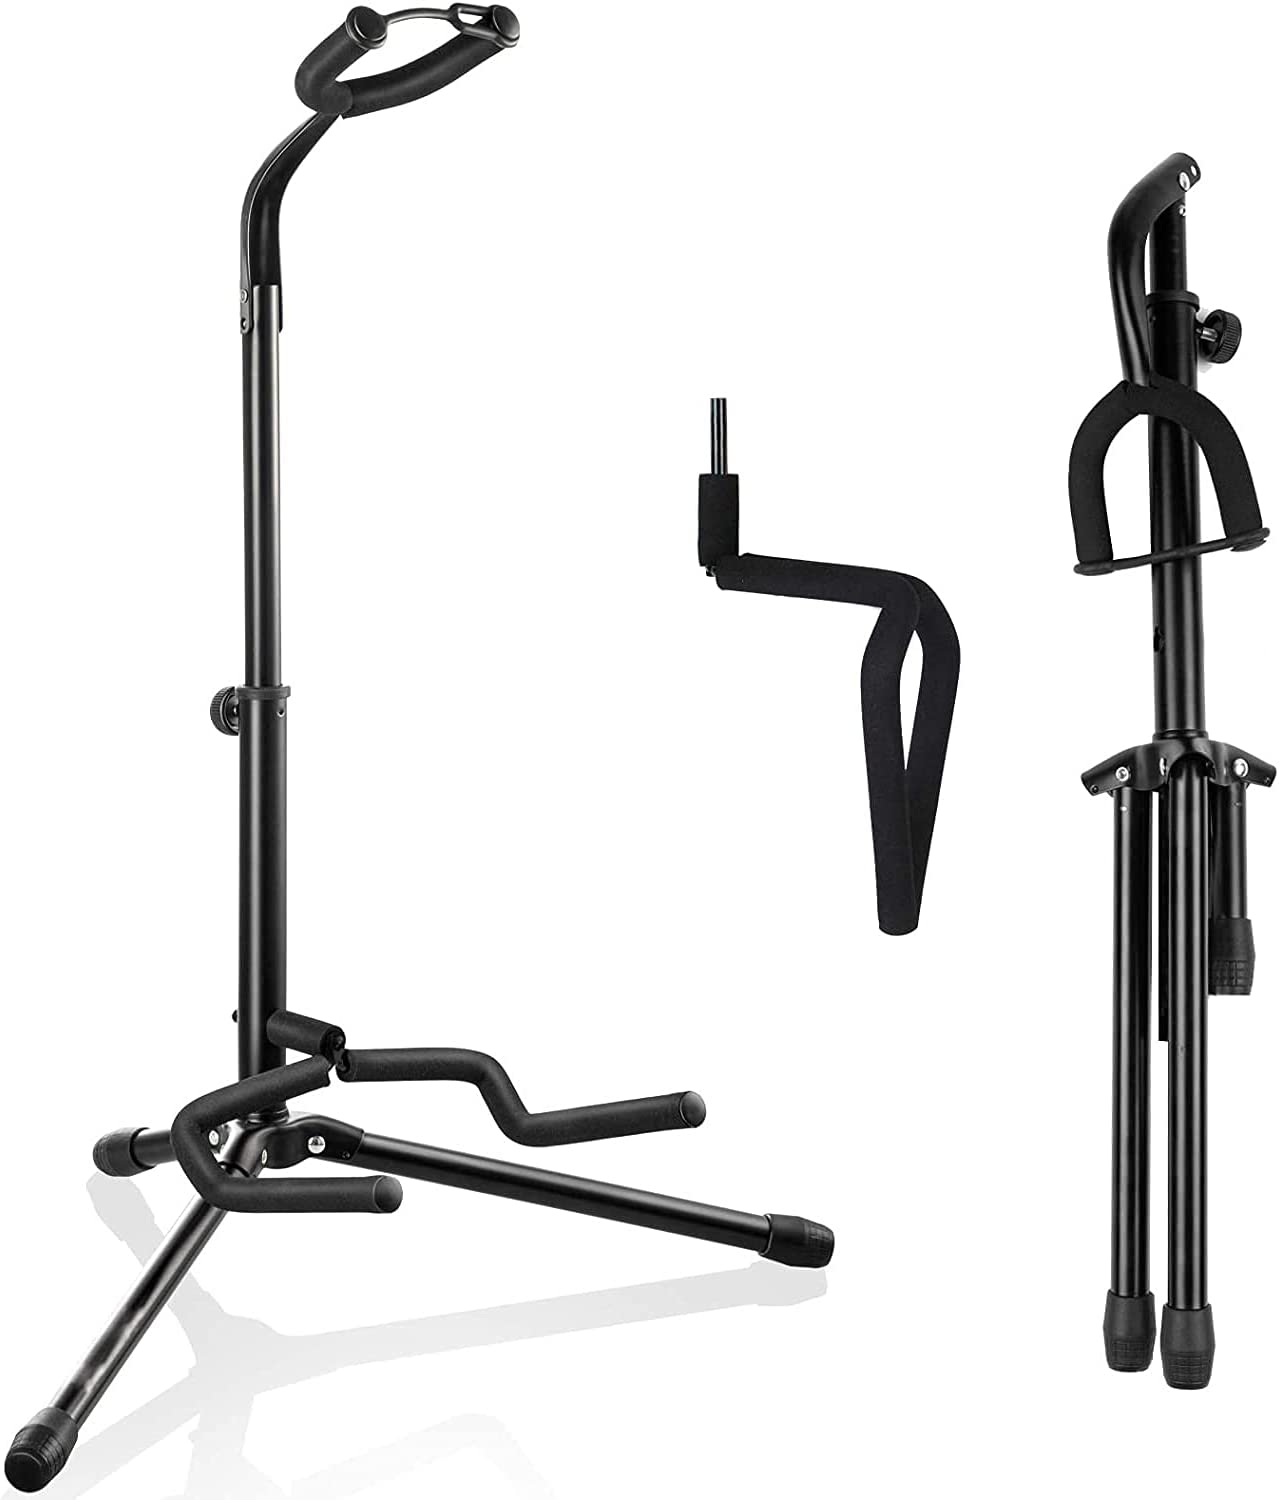 Musbeat Guitar Stand for Multiple Guitars Hardwood Multi Guitar Stand (3  Acoustic Guitar, 5 Electric or Bass), 5 Guitar Stand Rack for Men, Folding